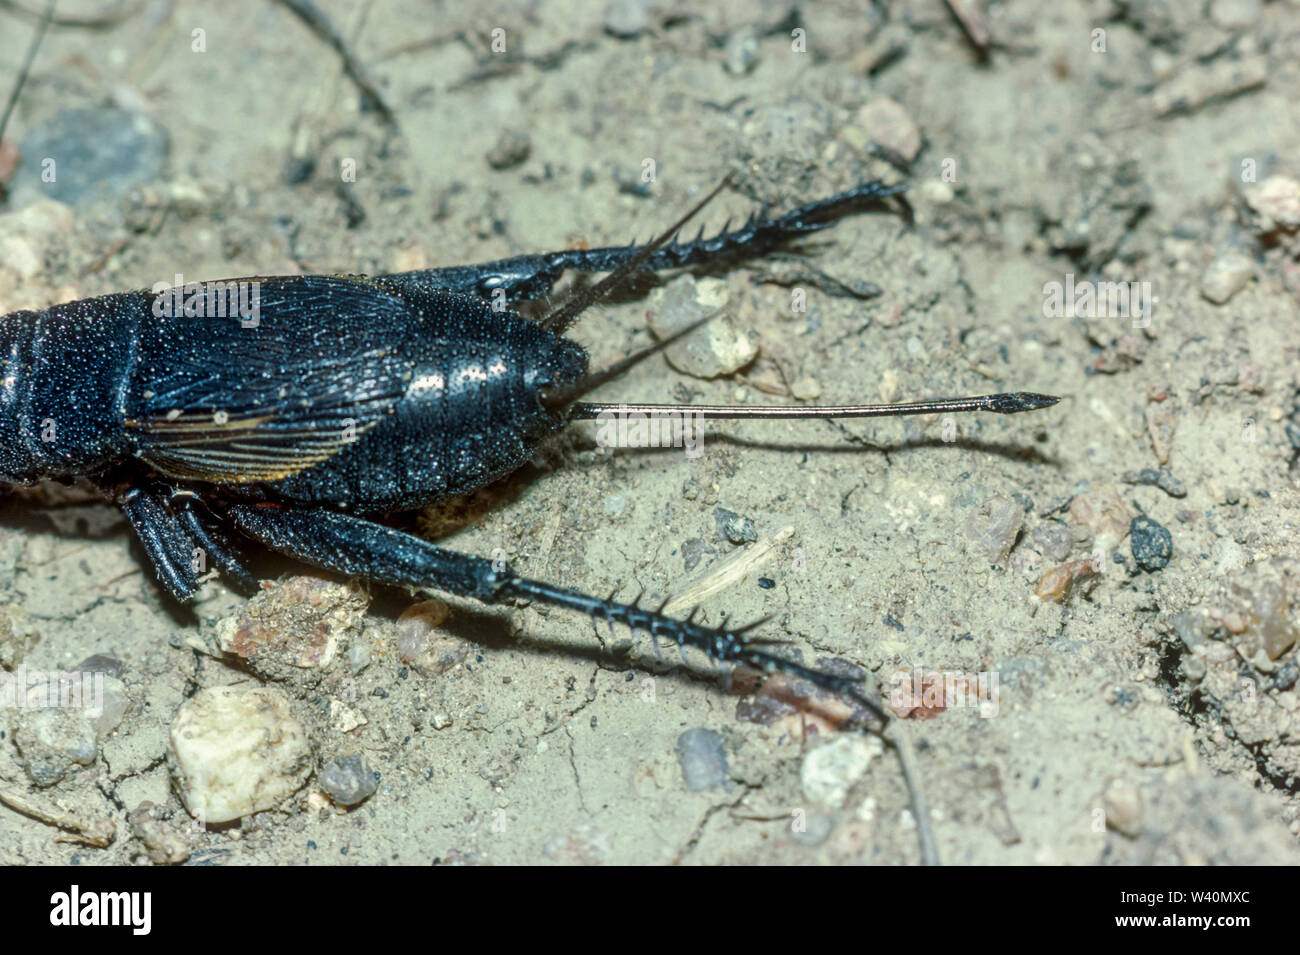 Close up view of rear of female Field Cricket (Gryllus assimilis), showing  egg laying ovipositor, Lakewood Colorado US. Stock Photo